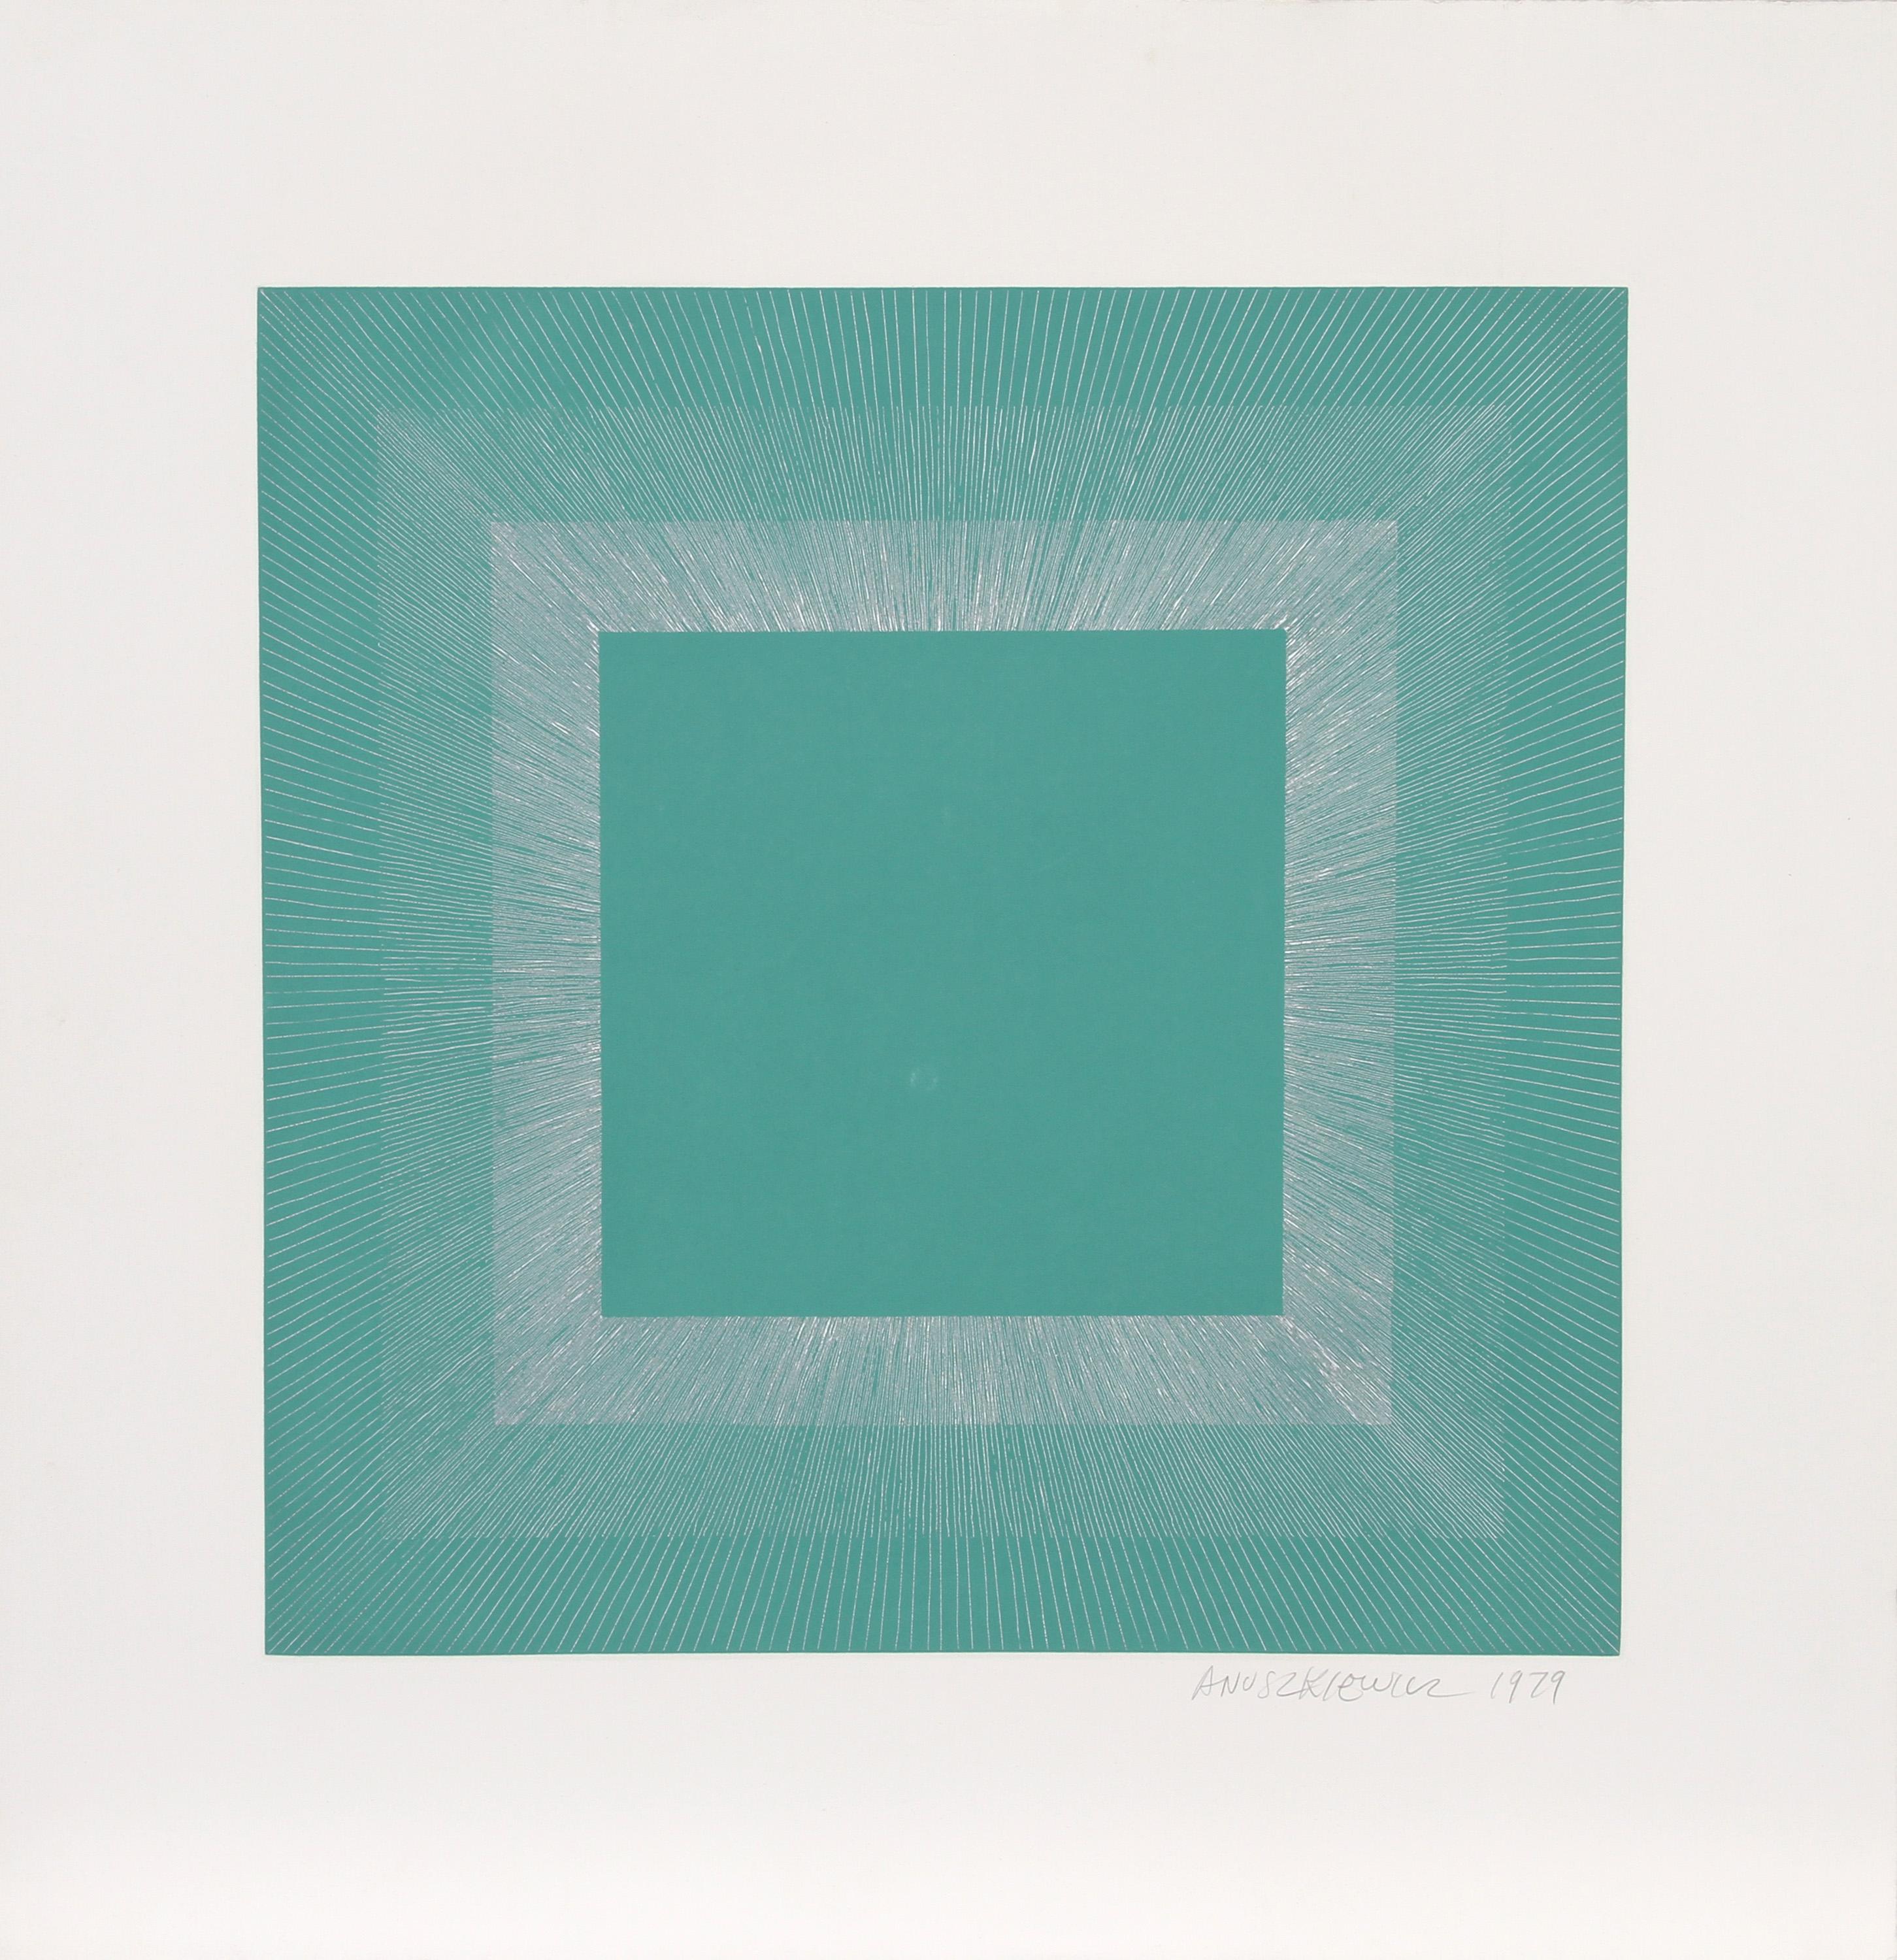 Richard Anuszkiewicz Abstract Print - Winter Suite (Green with Silver), OP Art Etching by Anuszkiewicz